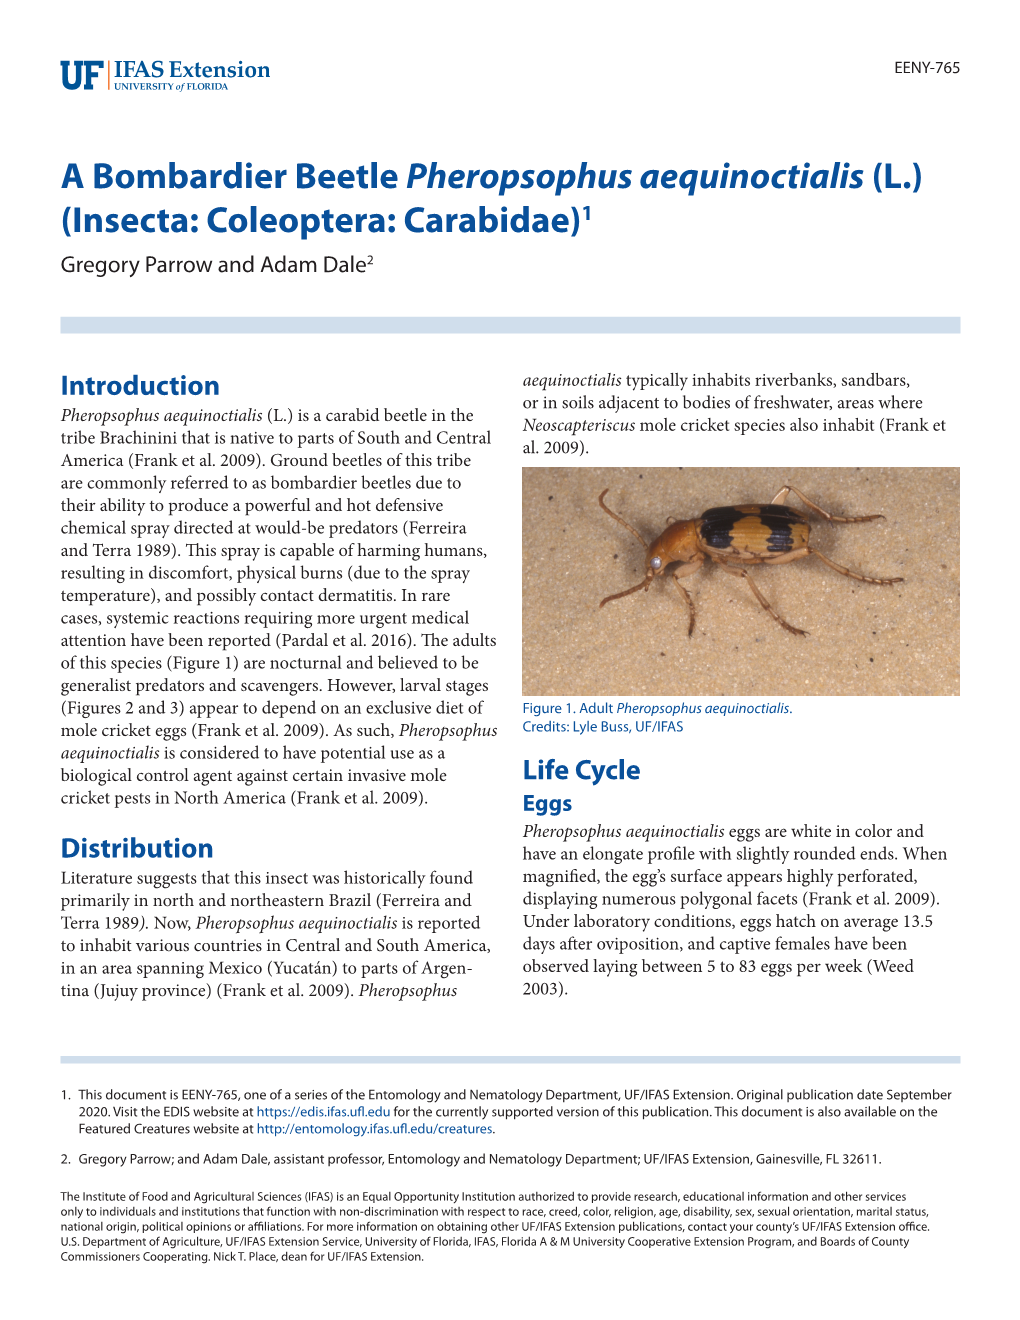 A Bombardier Beetle Pheropsophus Aequinoctialis (L.) (Insecta: Coleoptera: Carabidae)1 Gregory Parrow and Adam Dale2